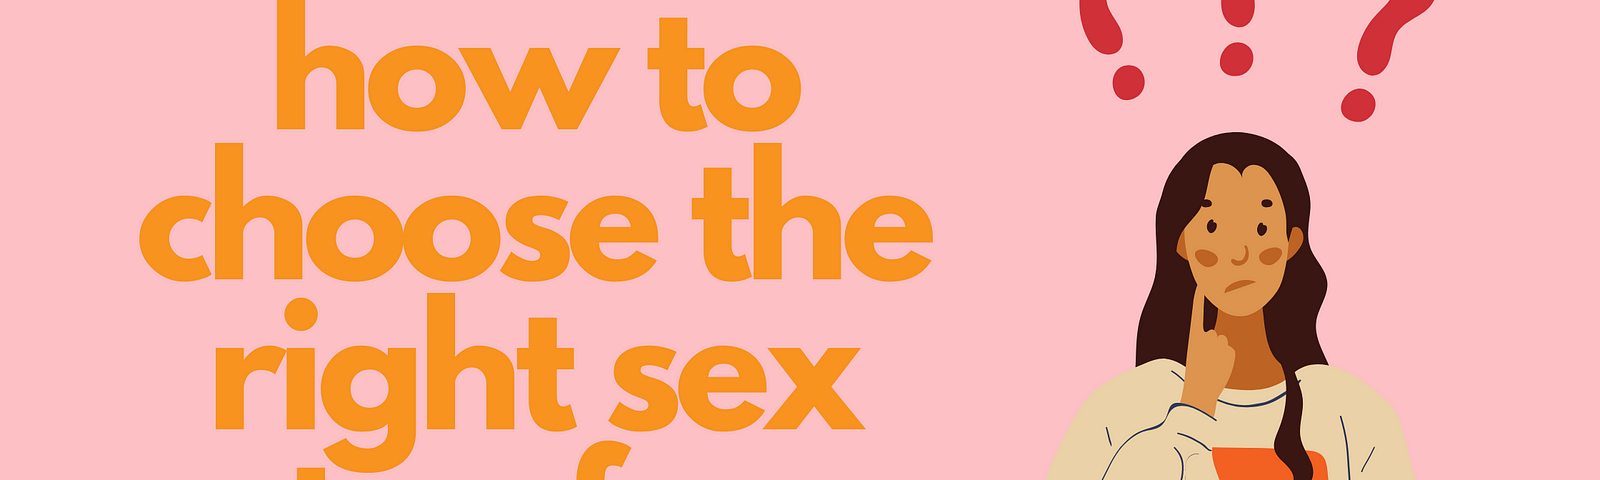 orange text on a light pink background reads: how to choose the right sex toy for you. It is next to an illustration of a woman with three question marks above her head.